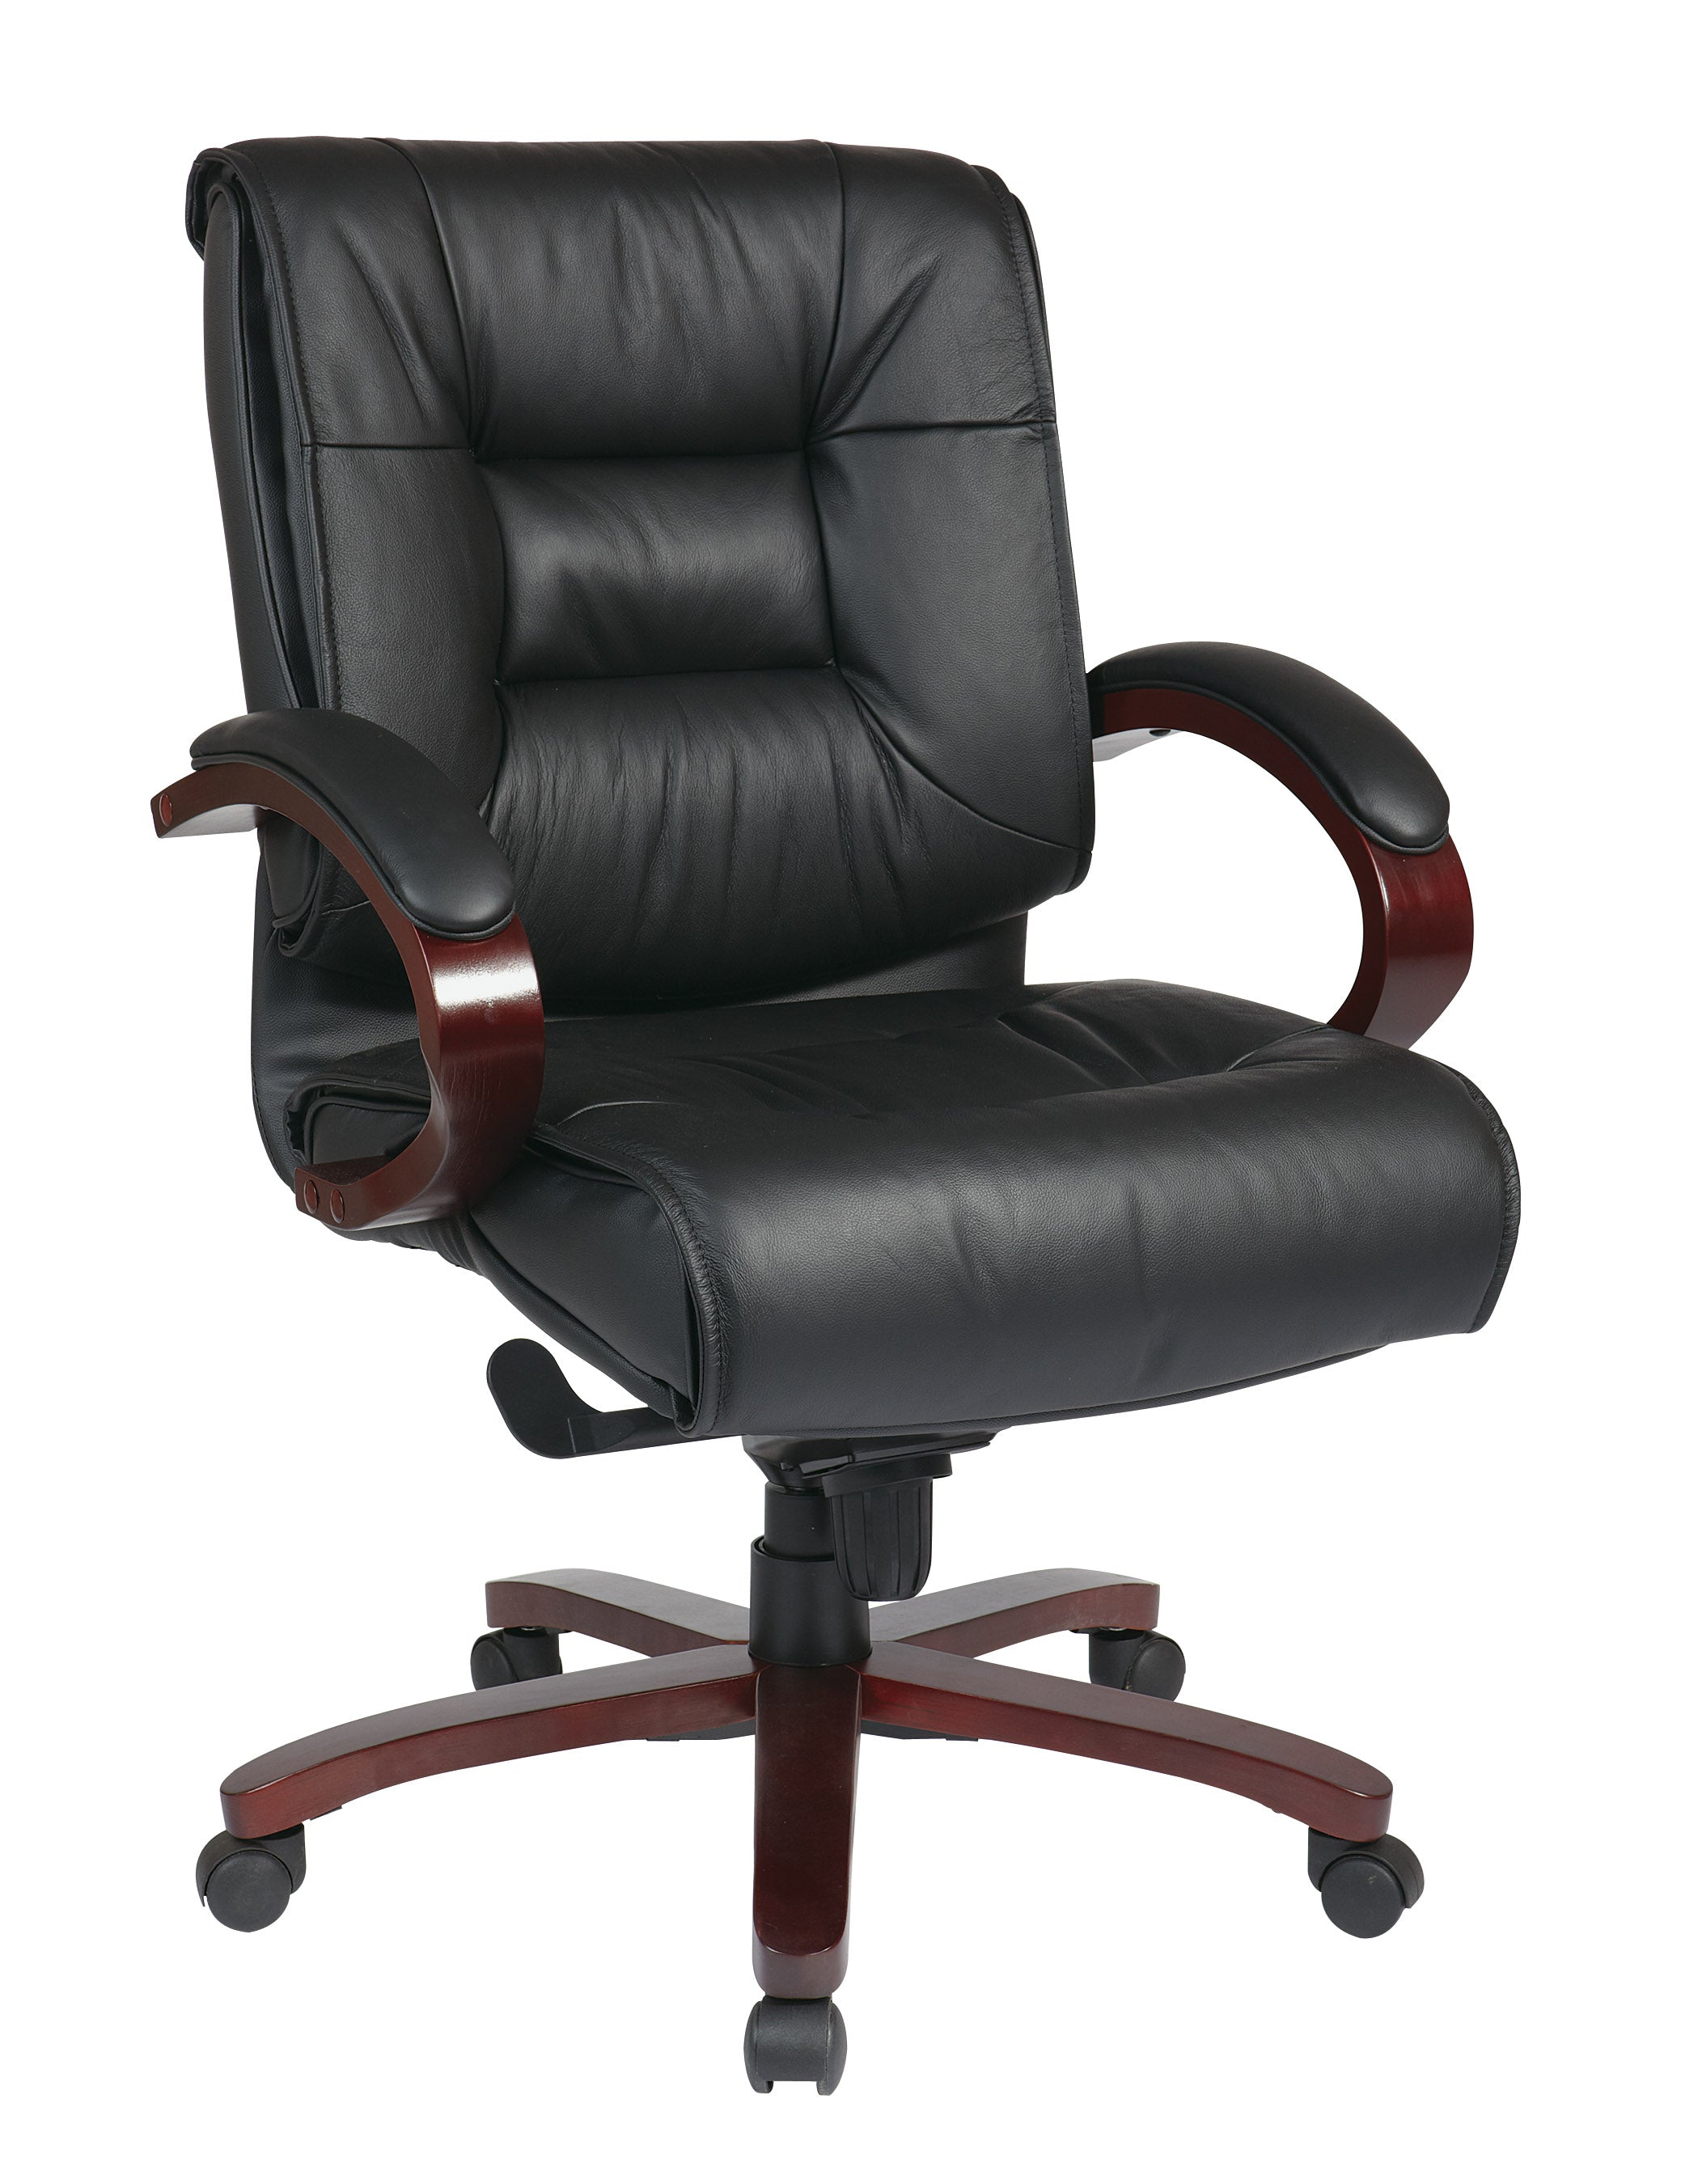 Deluxe Mid Back Black Executive Leather Chair